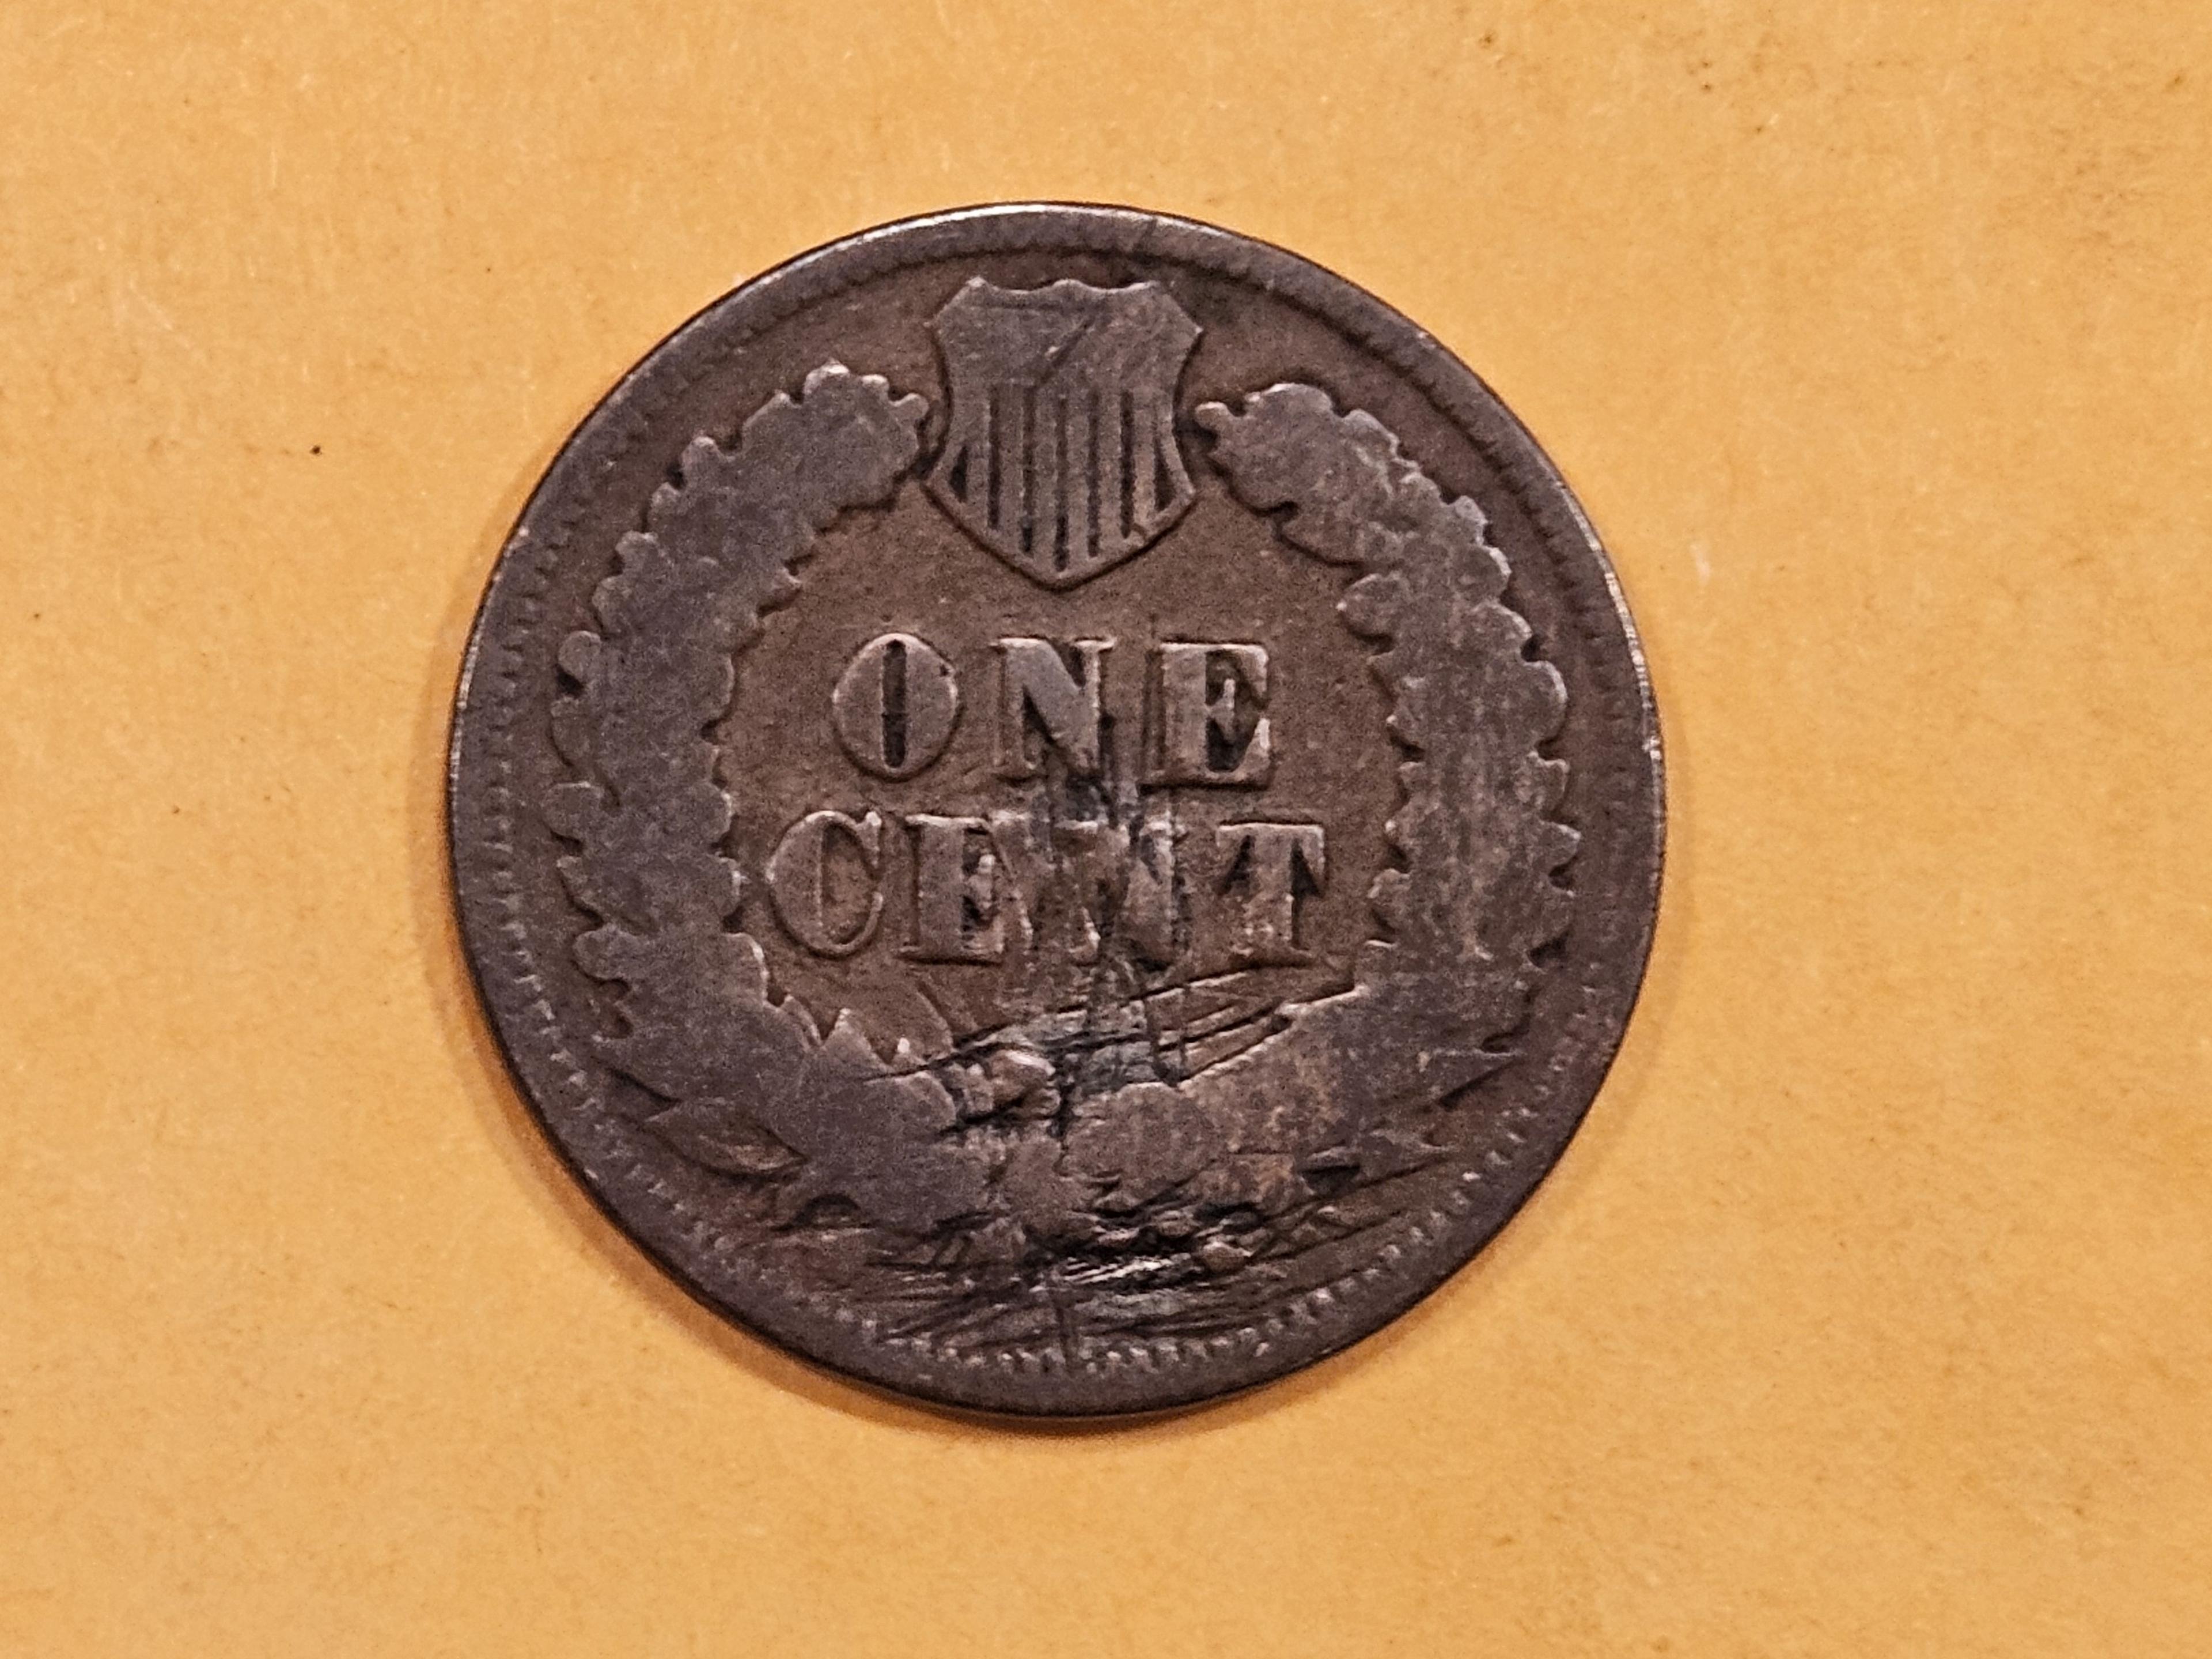 Better Date 1878 Indian Cent